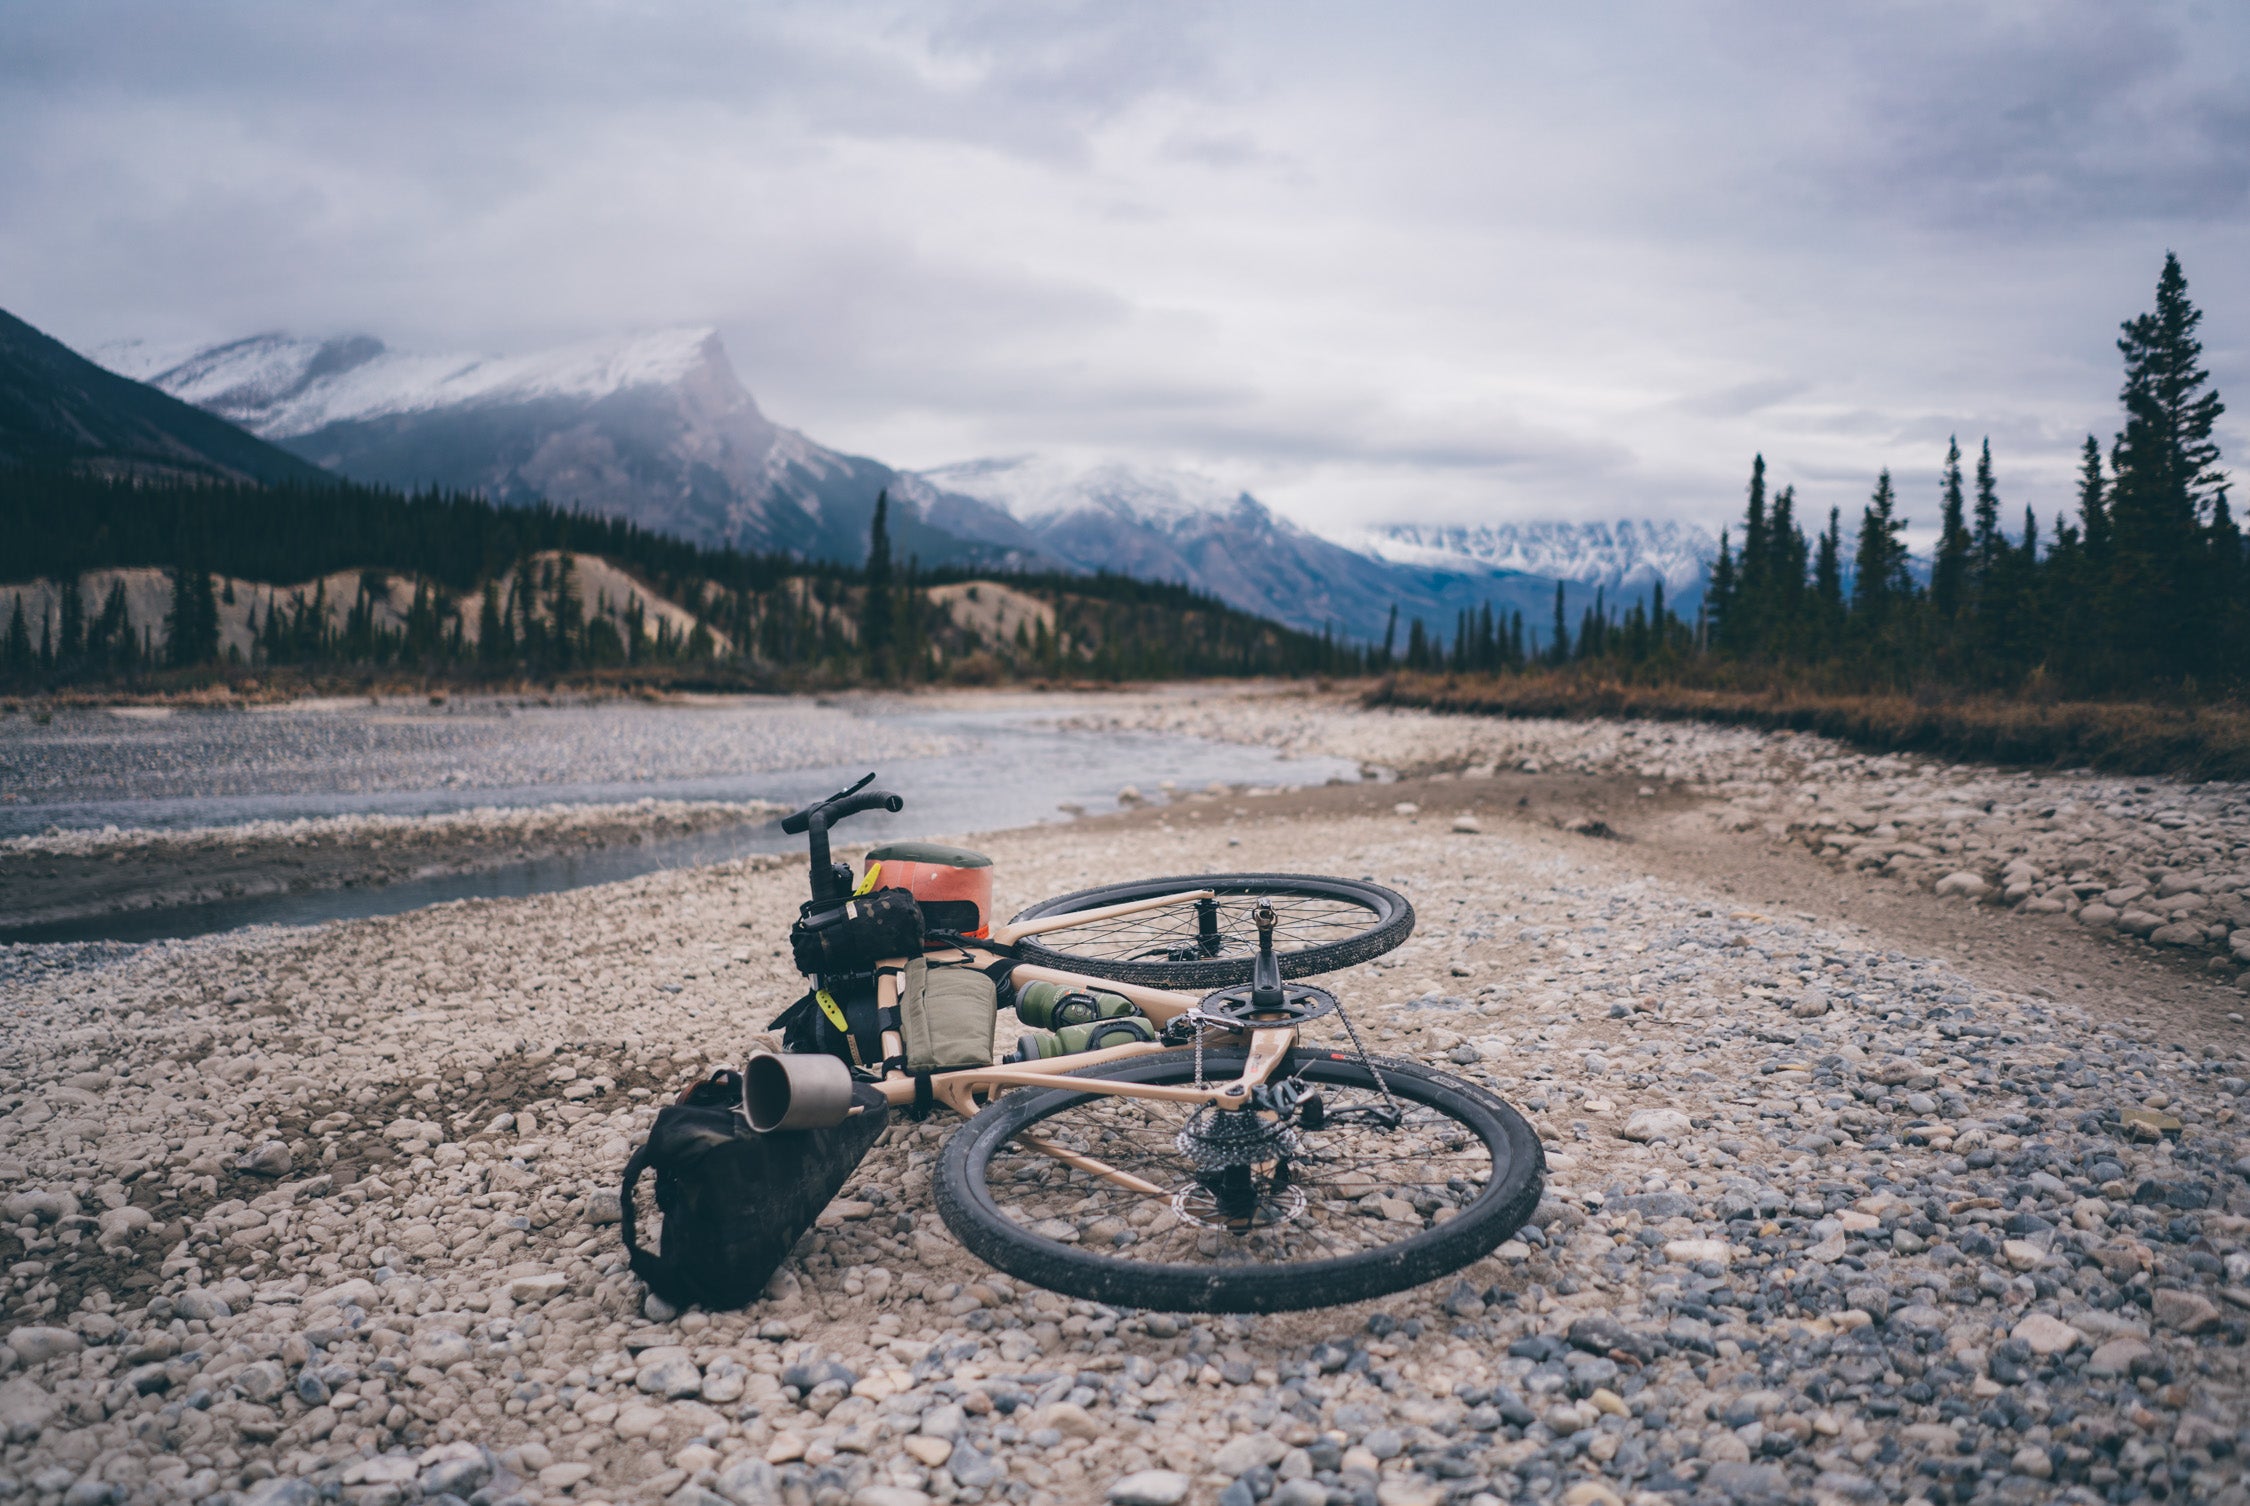 From the Field: Ben Johnson Heads to the Bikepack Canada Summit